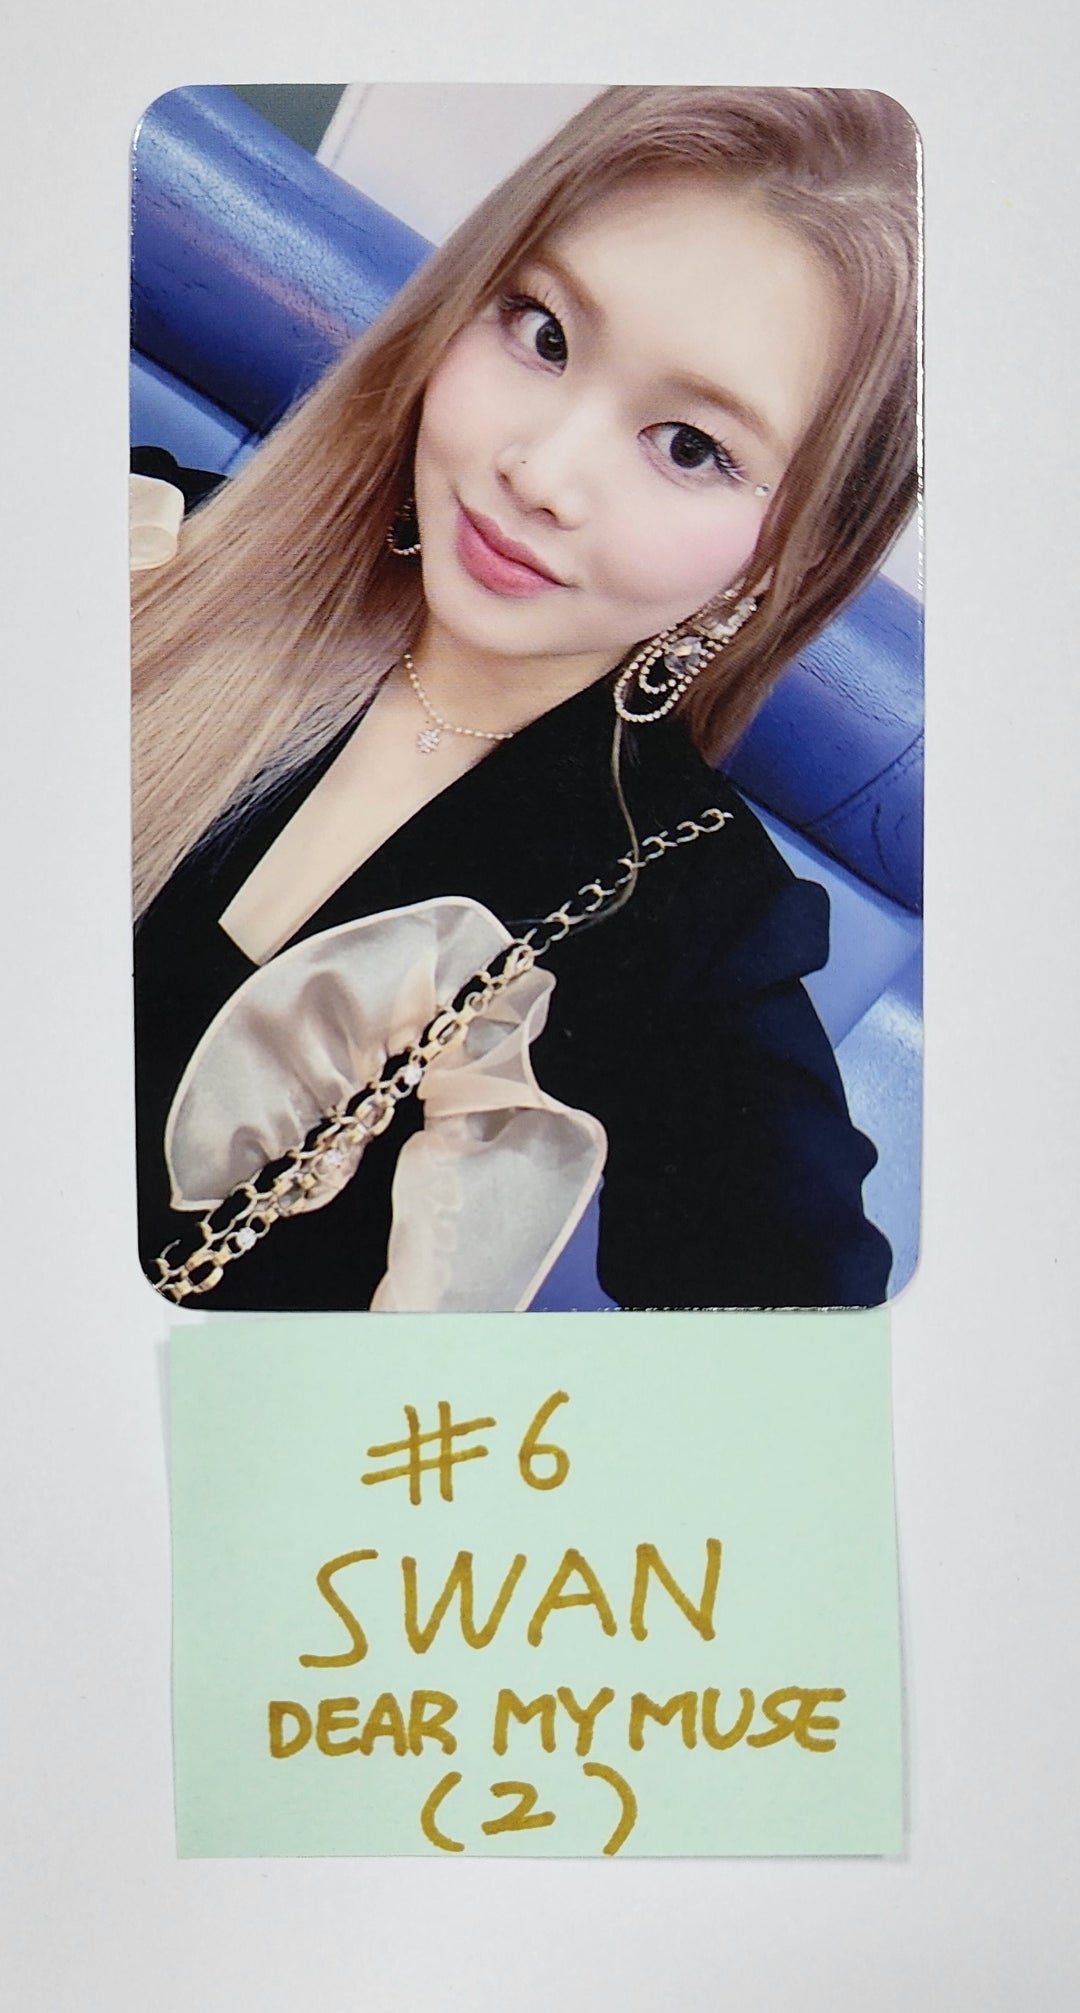 PURPLE KISS "Cabin Fever" - Dear My Muse Fansign Event Photocard Round 2